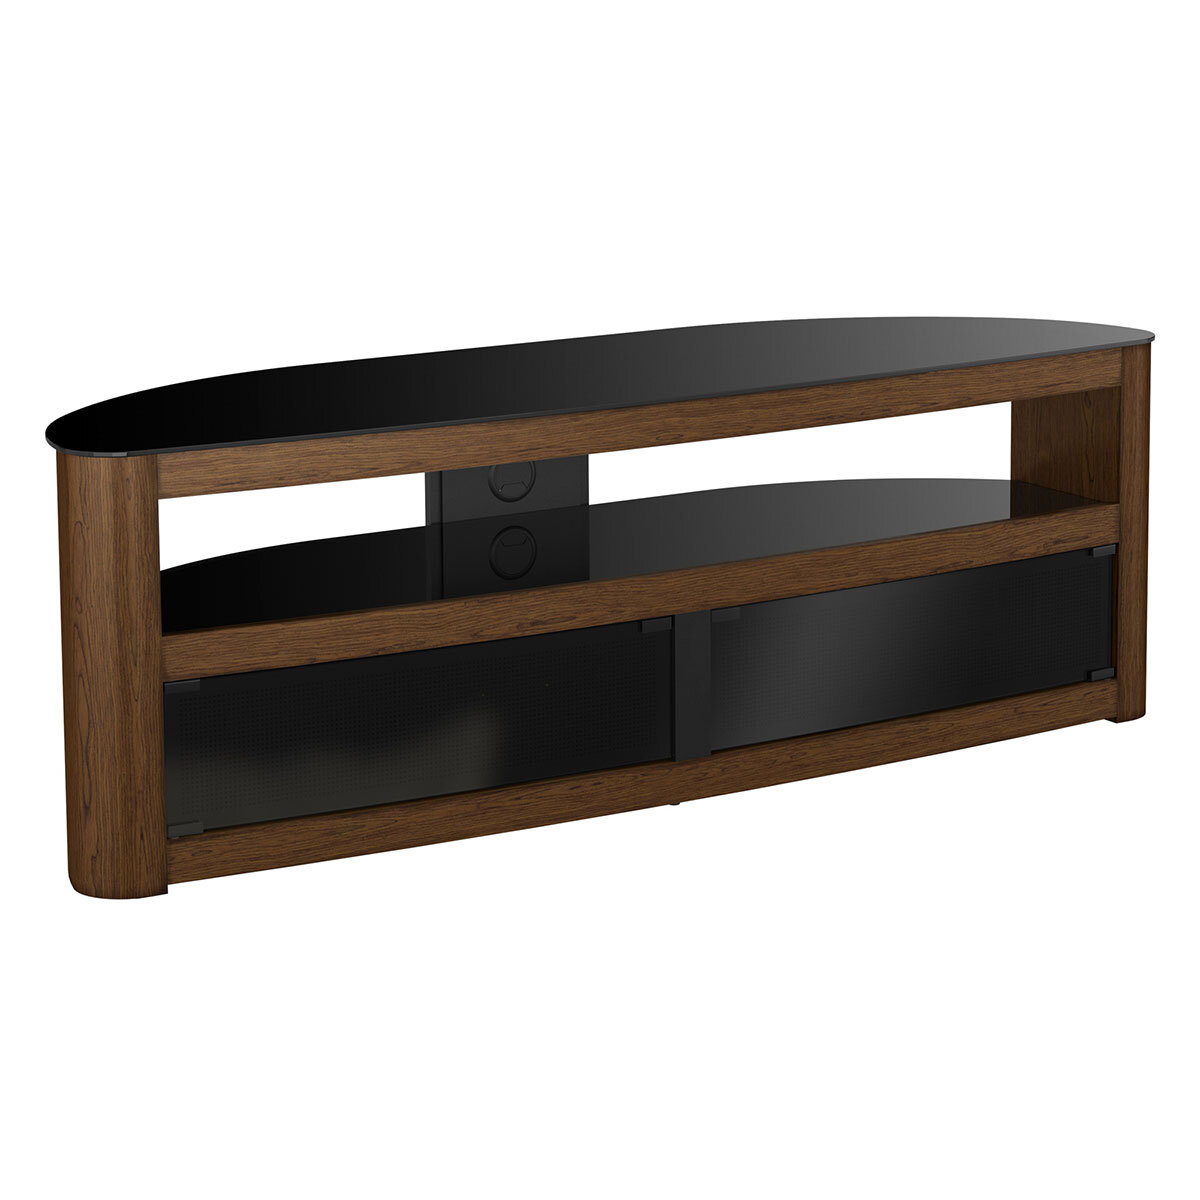 AVF Burghley Affinity Plus Curved TV Stand for TVs up to 70"